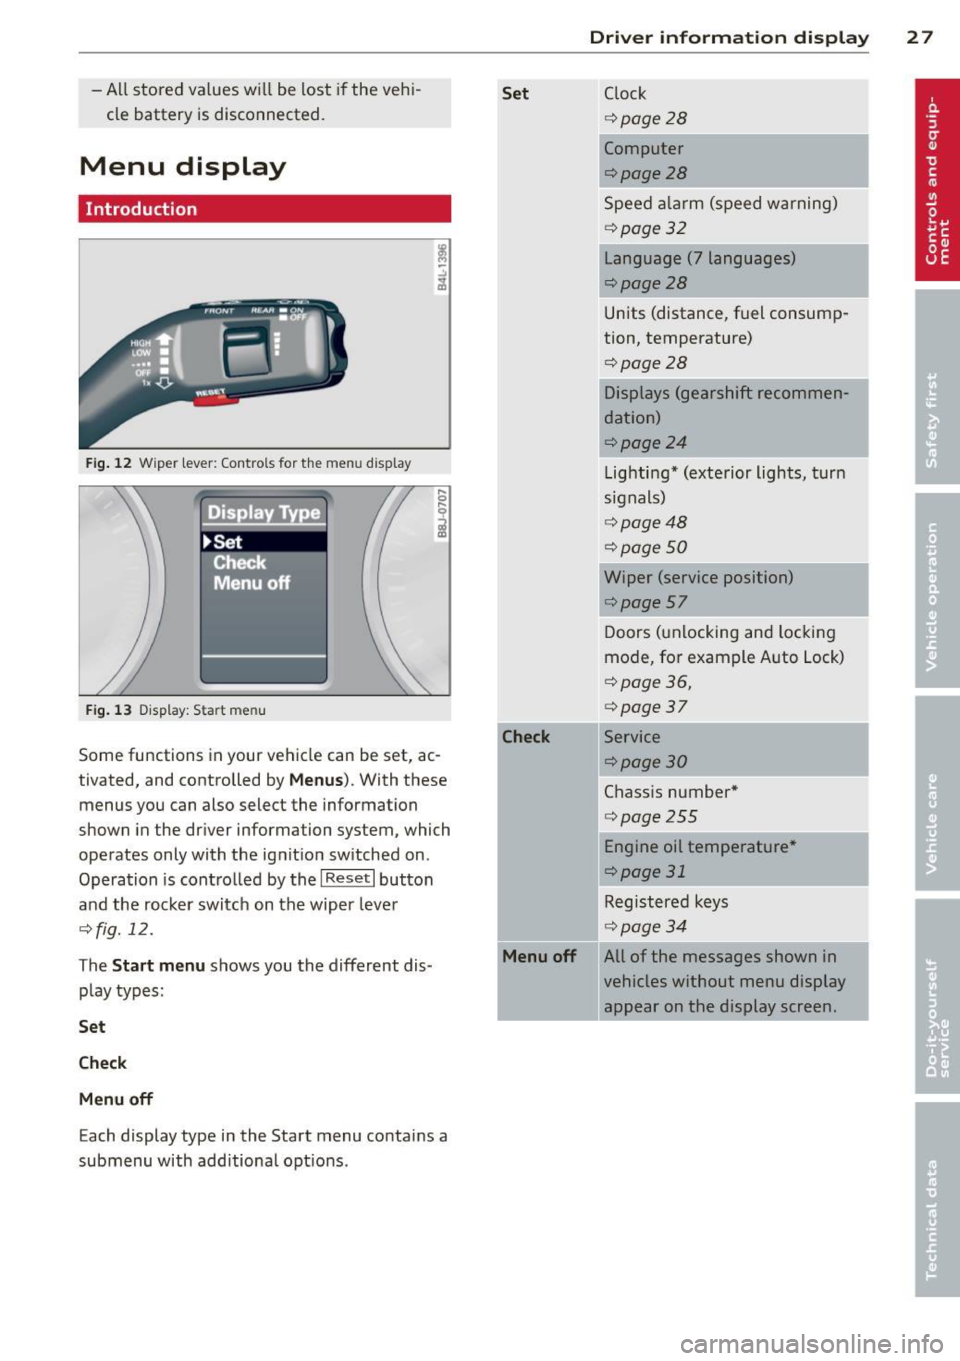 AUDI S3 2012  Owners Manual -All  stored  va lues wi ll be lost  if the  veh i­
cle battery  is disconnected. 
Menu  display 
Introduction 
F ig . 12  Wiper  lever: Controls  for the  men u display 
Fig . 13  Display:  Sta rt  